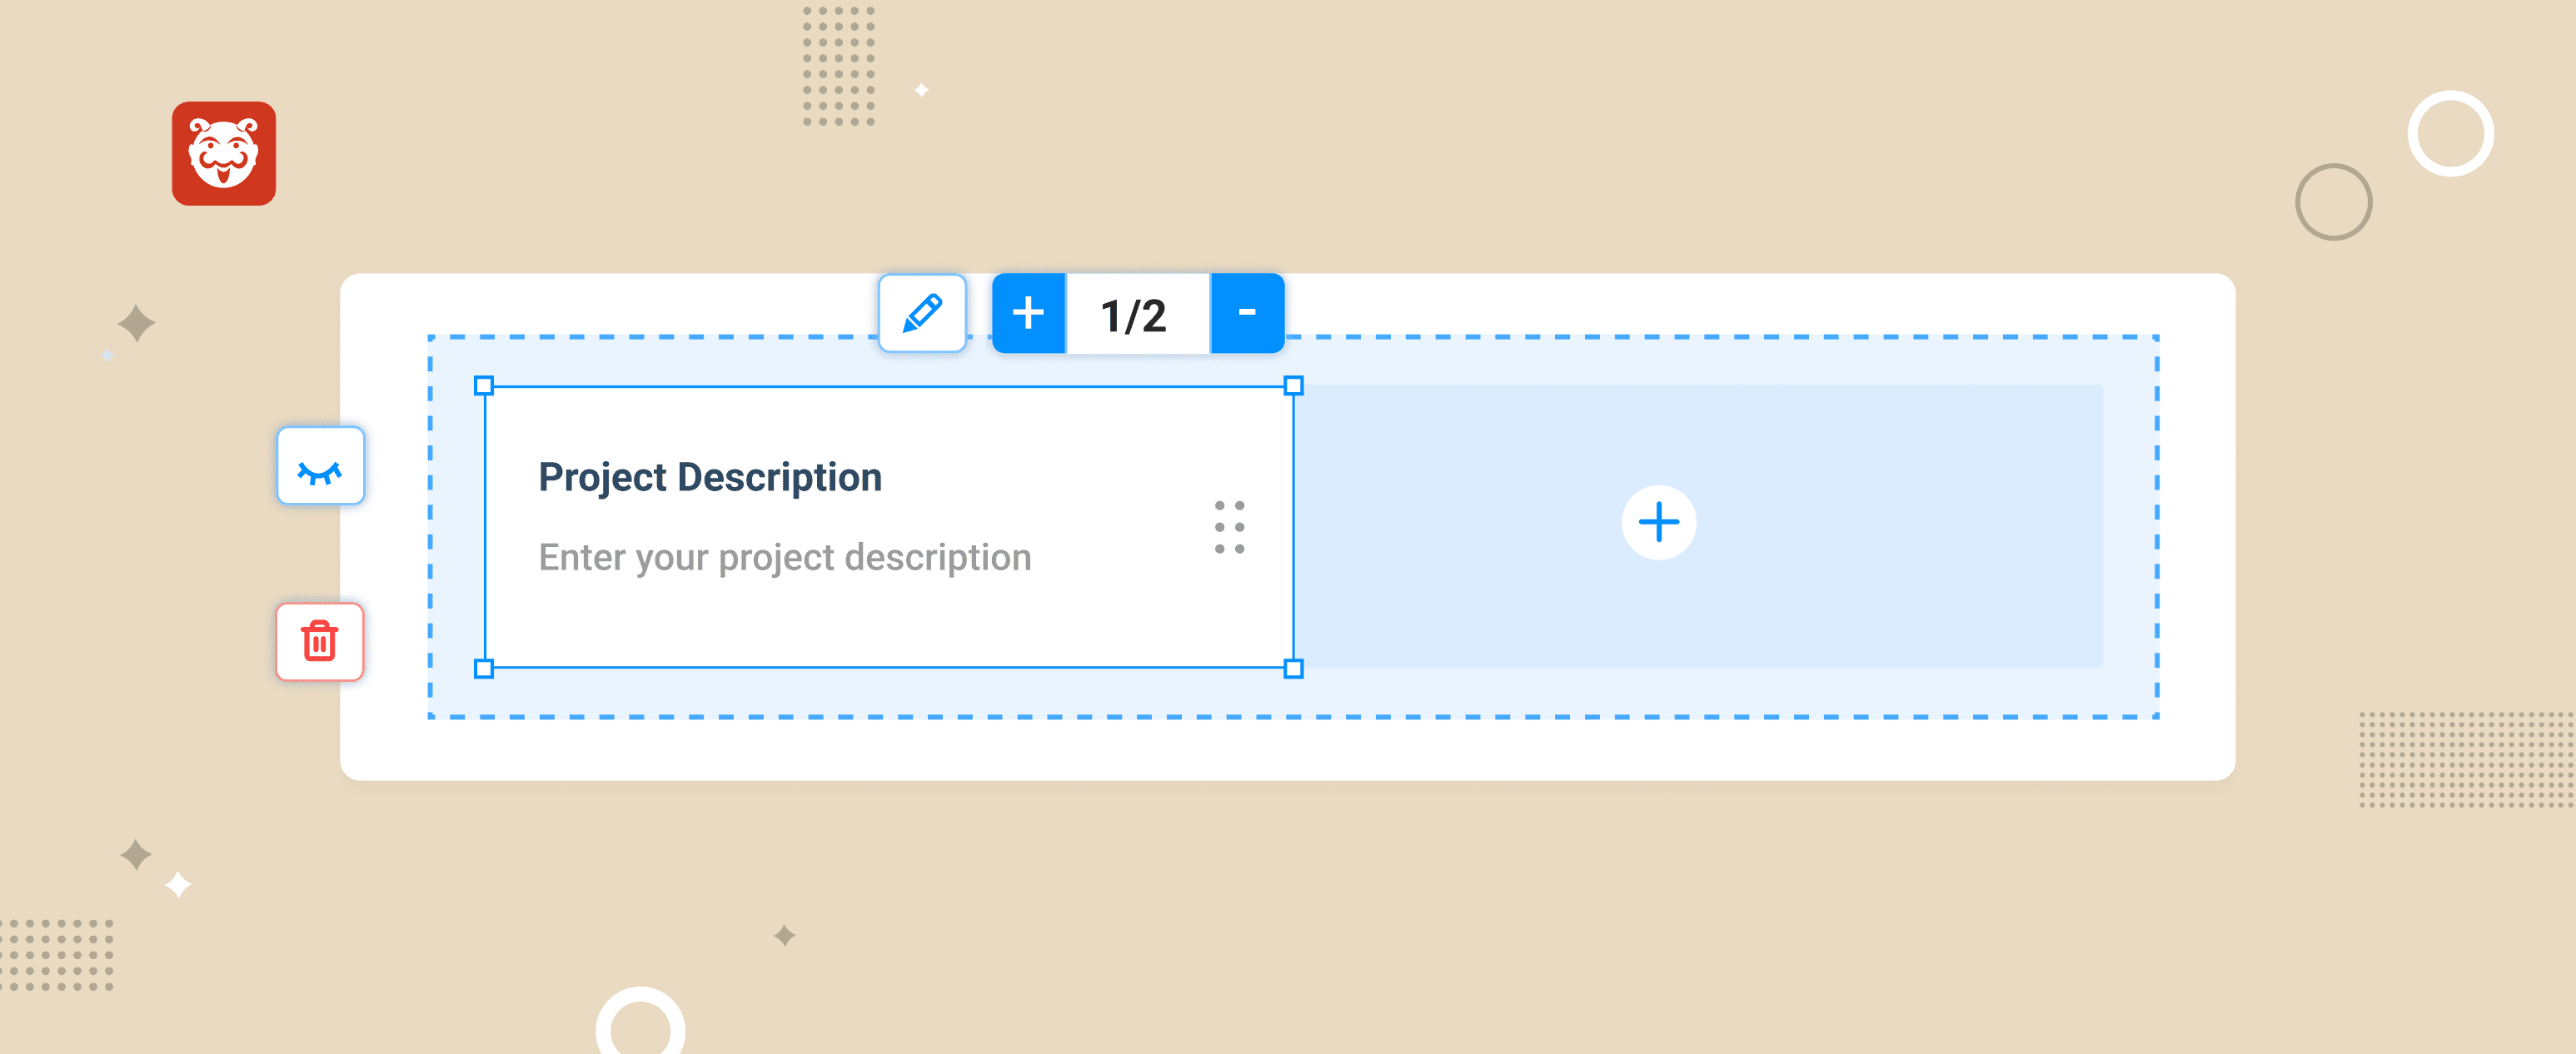 New & improved Custom Fields for better context capturing